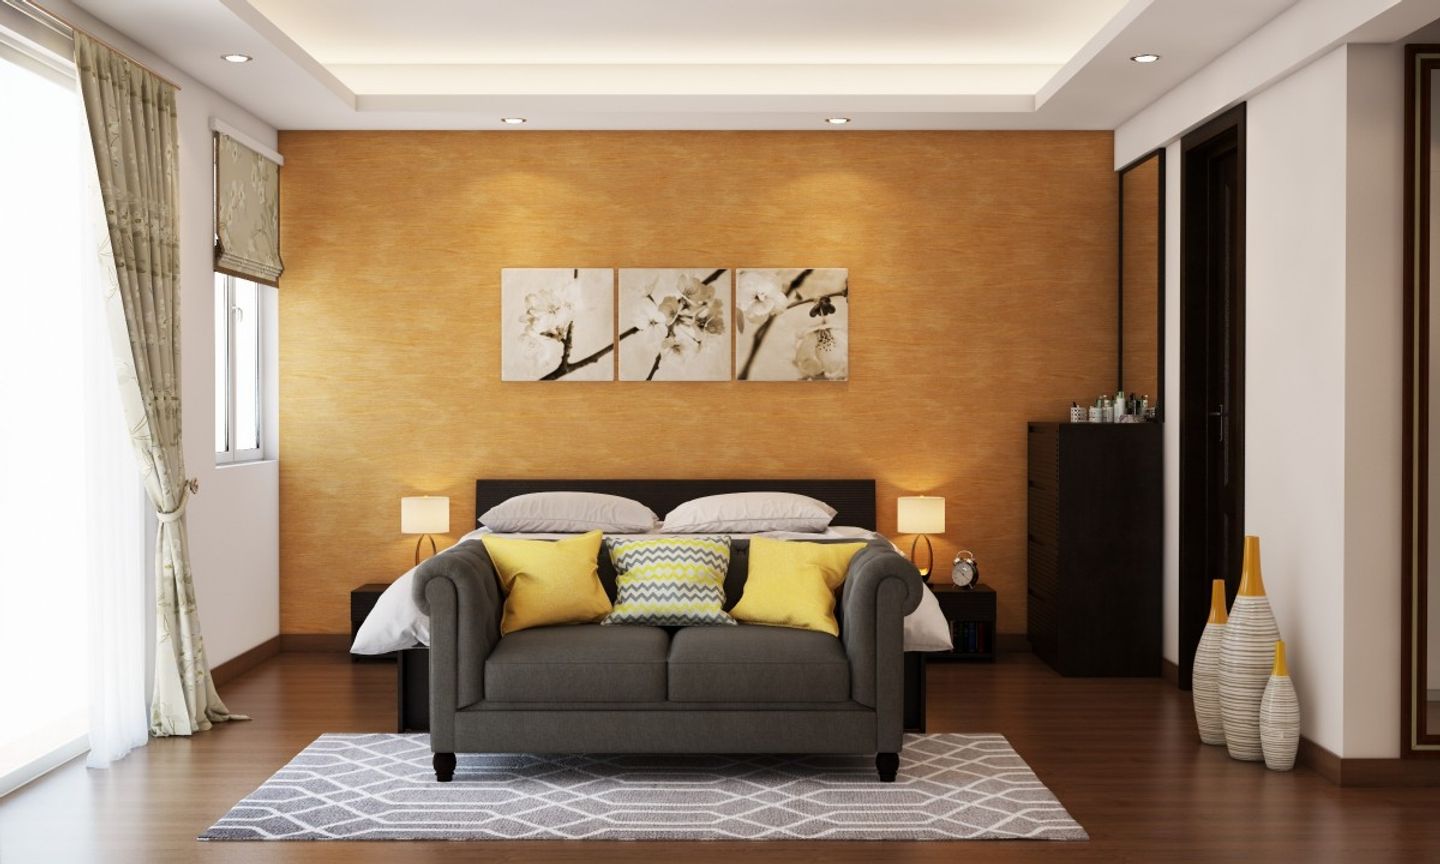 Modern Master Bedroom Design With Wall Art And Wallpaint